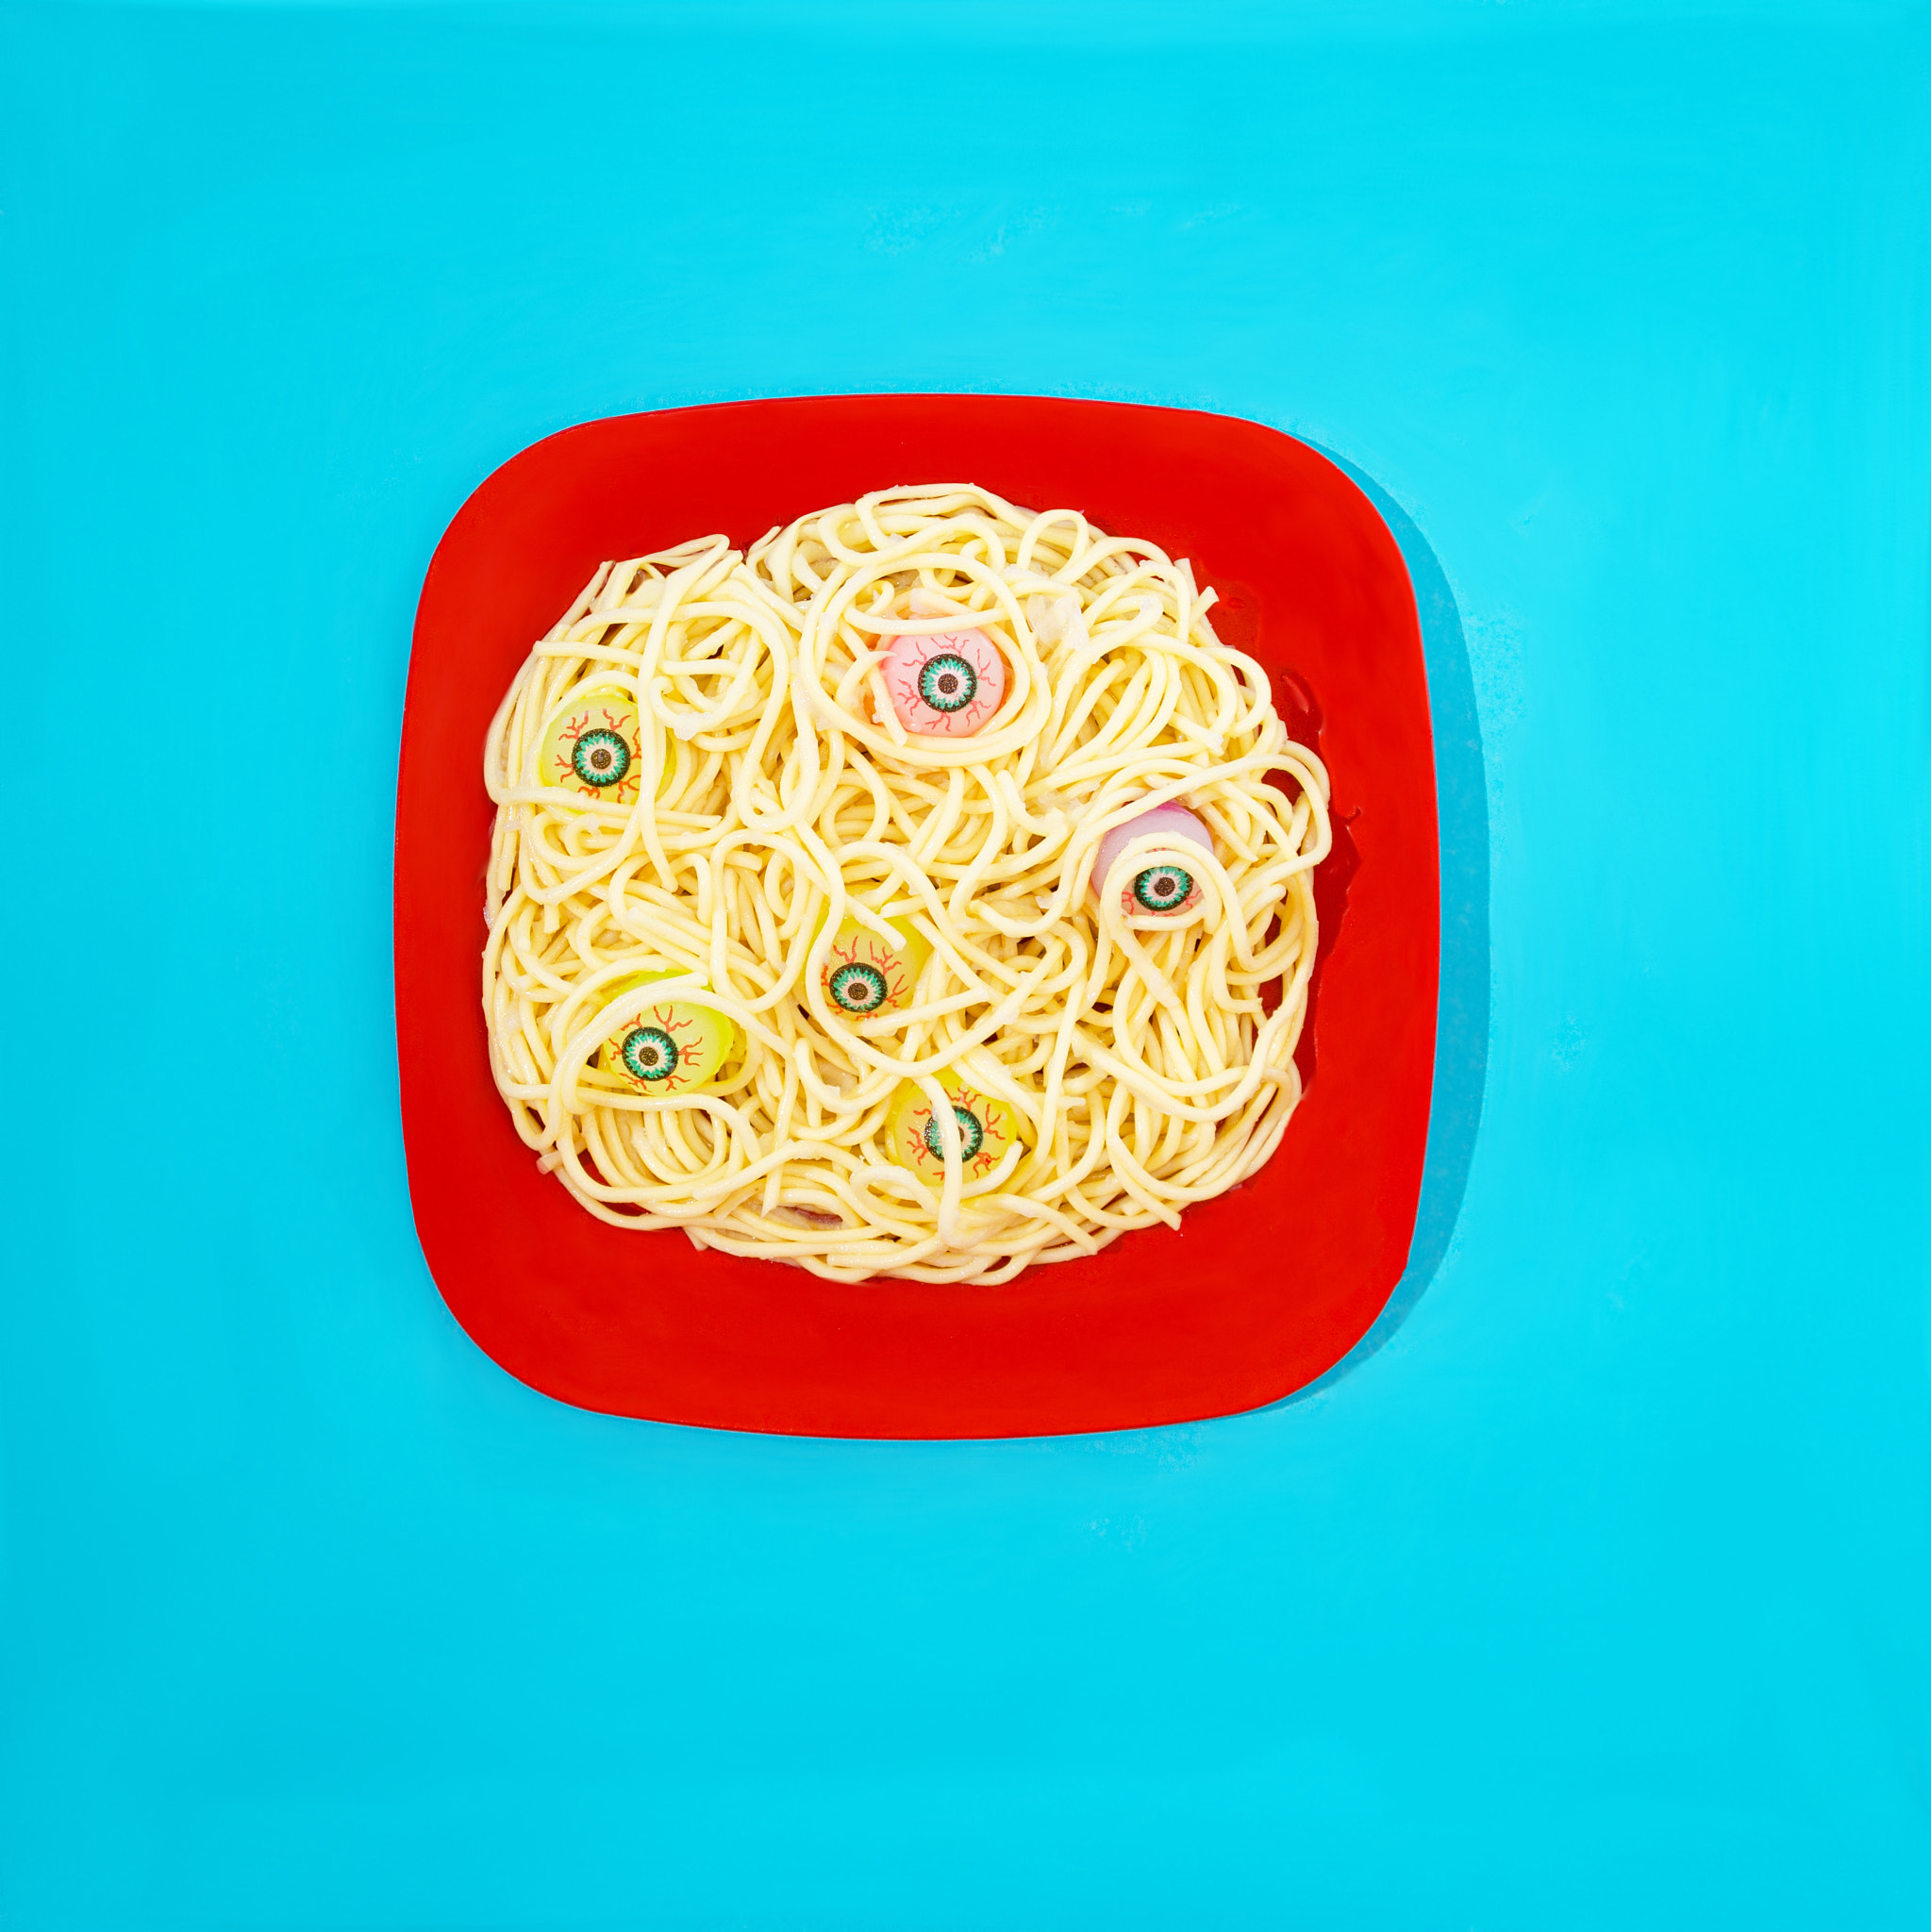 A red plate with spagetti and scary eye balls emerging from the food.